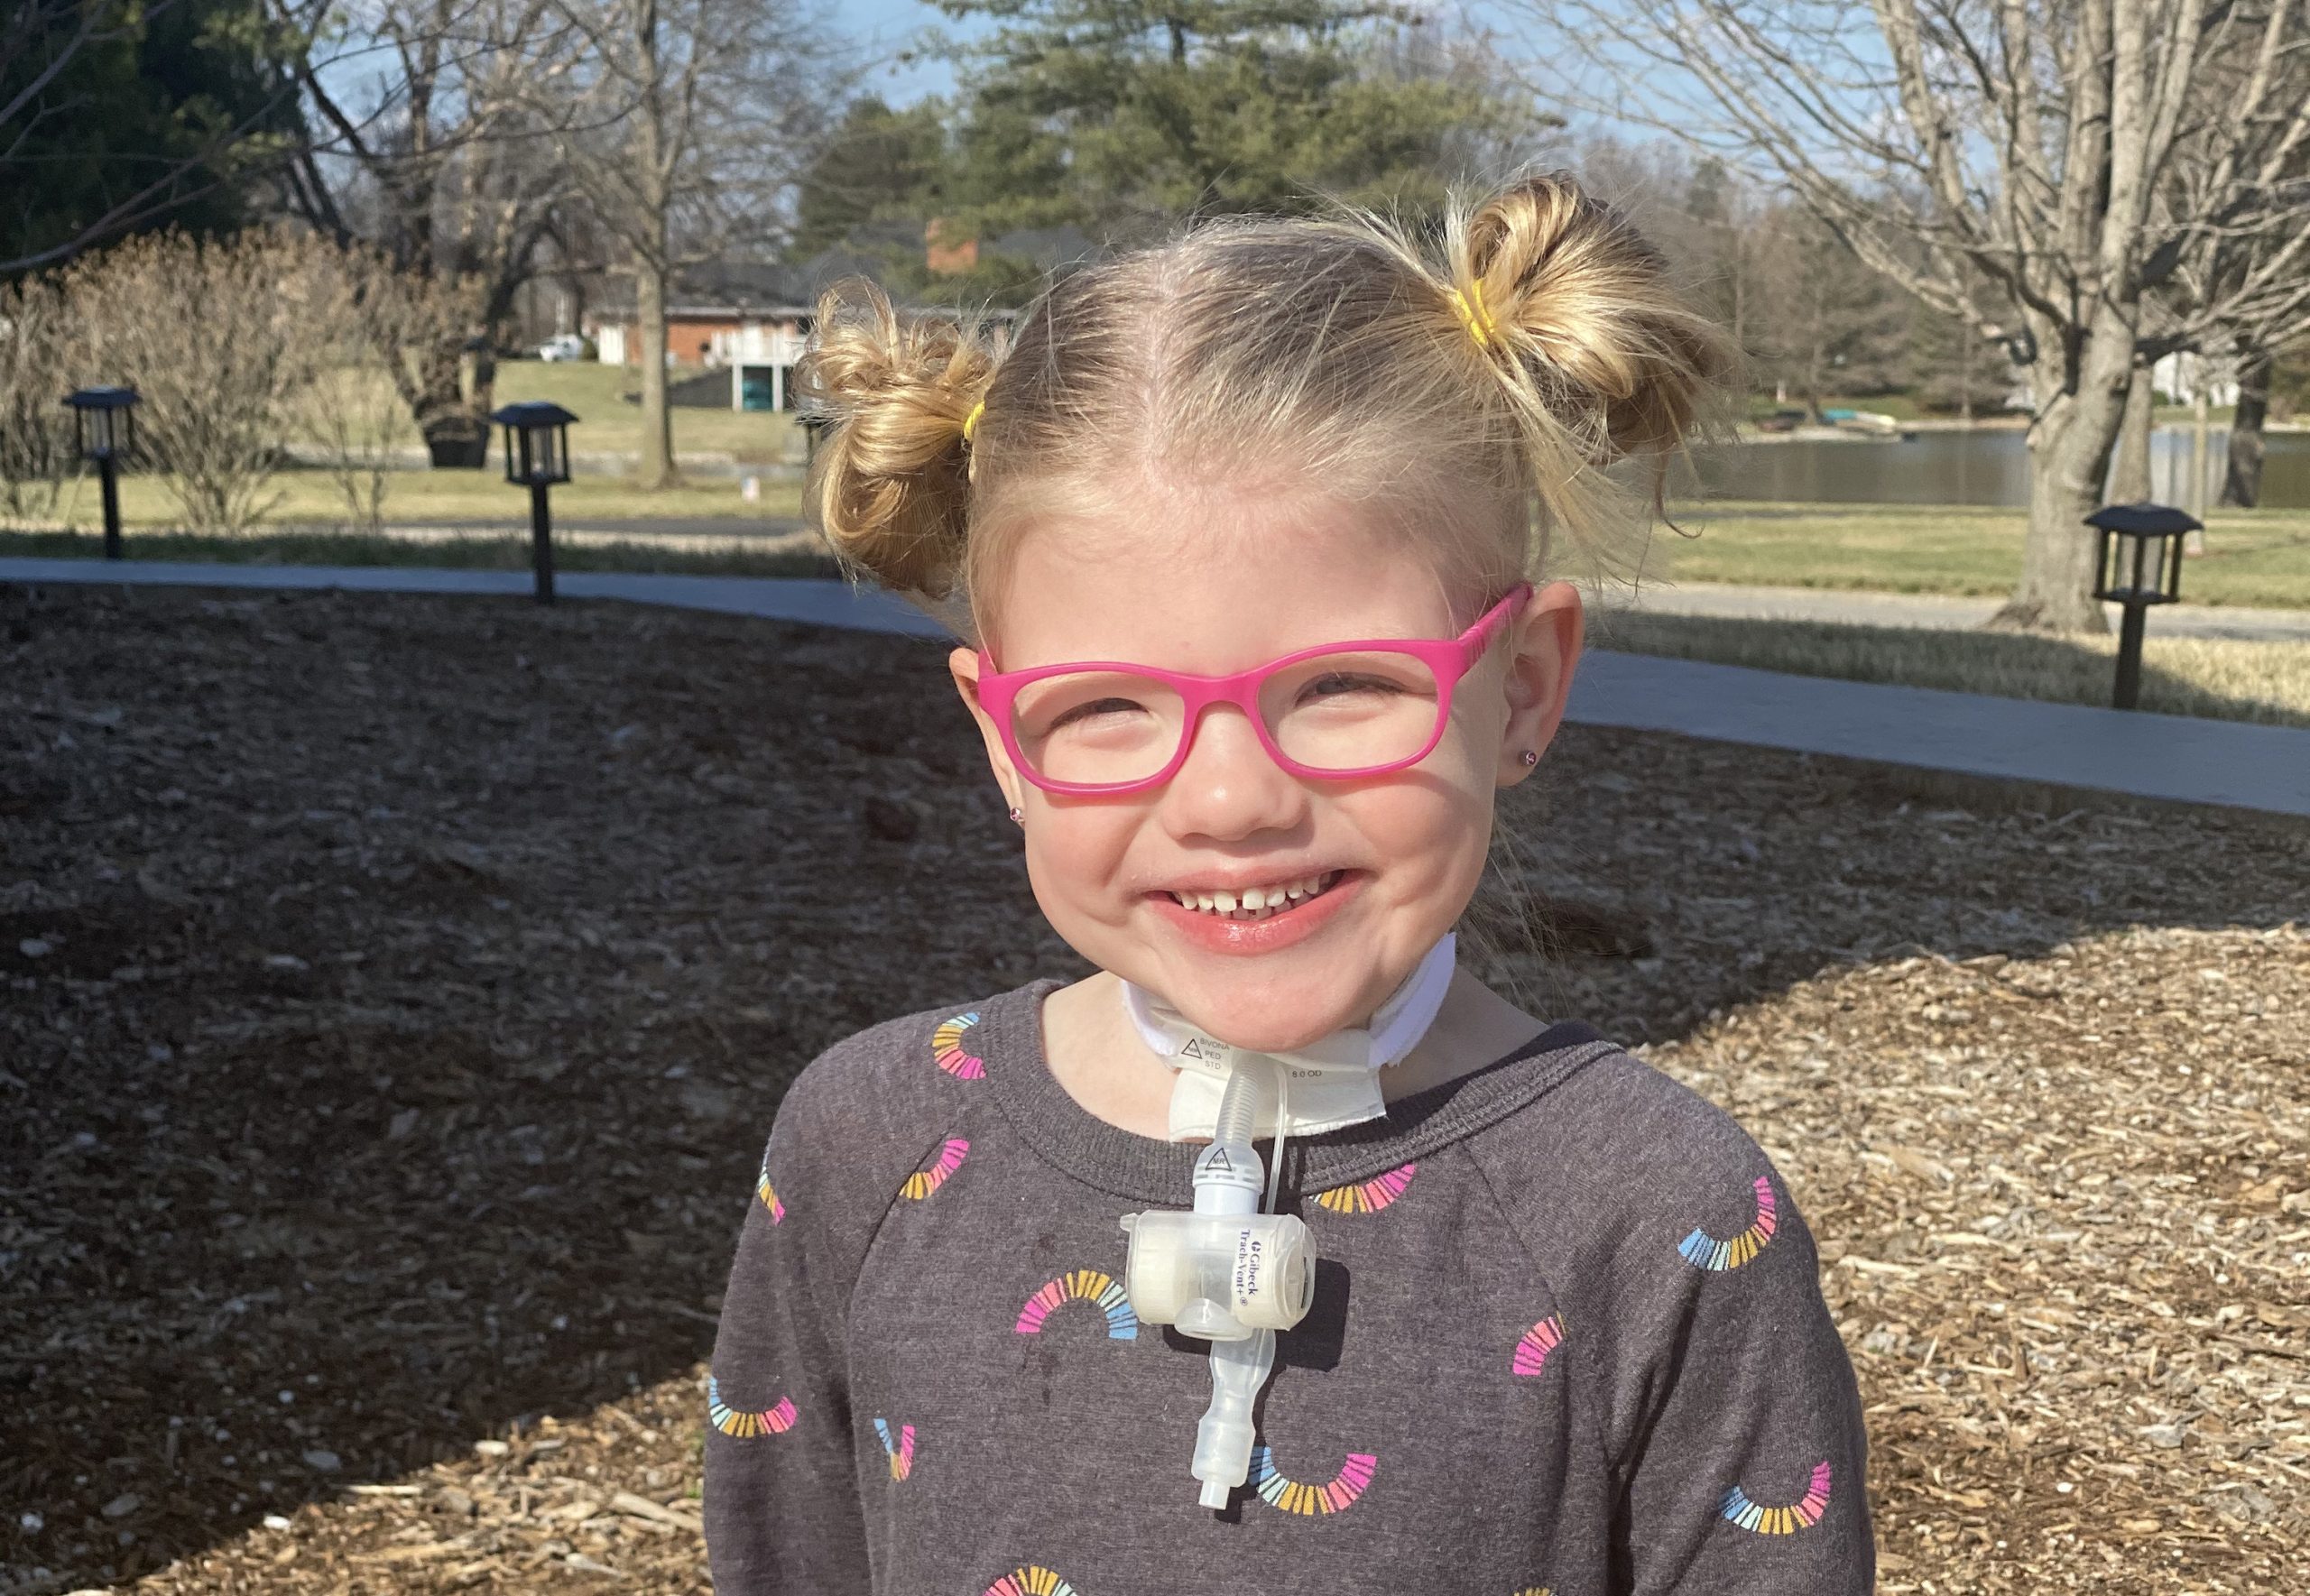 Home Care participant Willa sits outside with a big smile. She is wearing pink sunglasses and has a tracheostomy